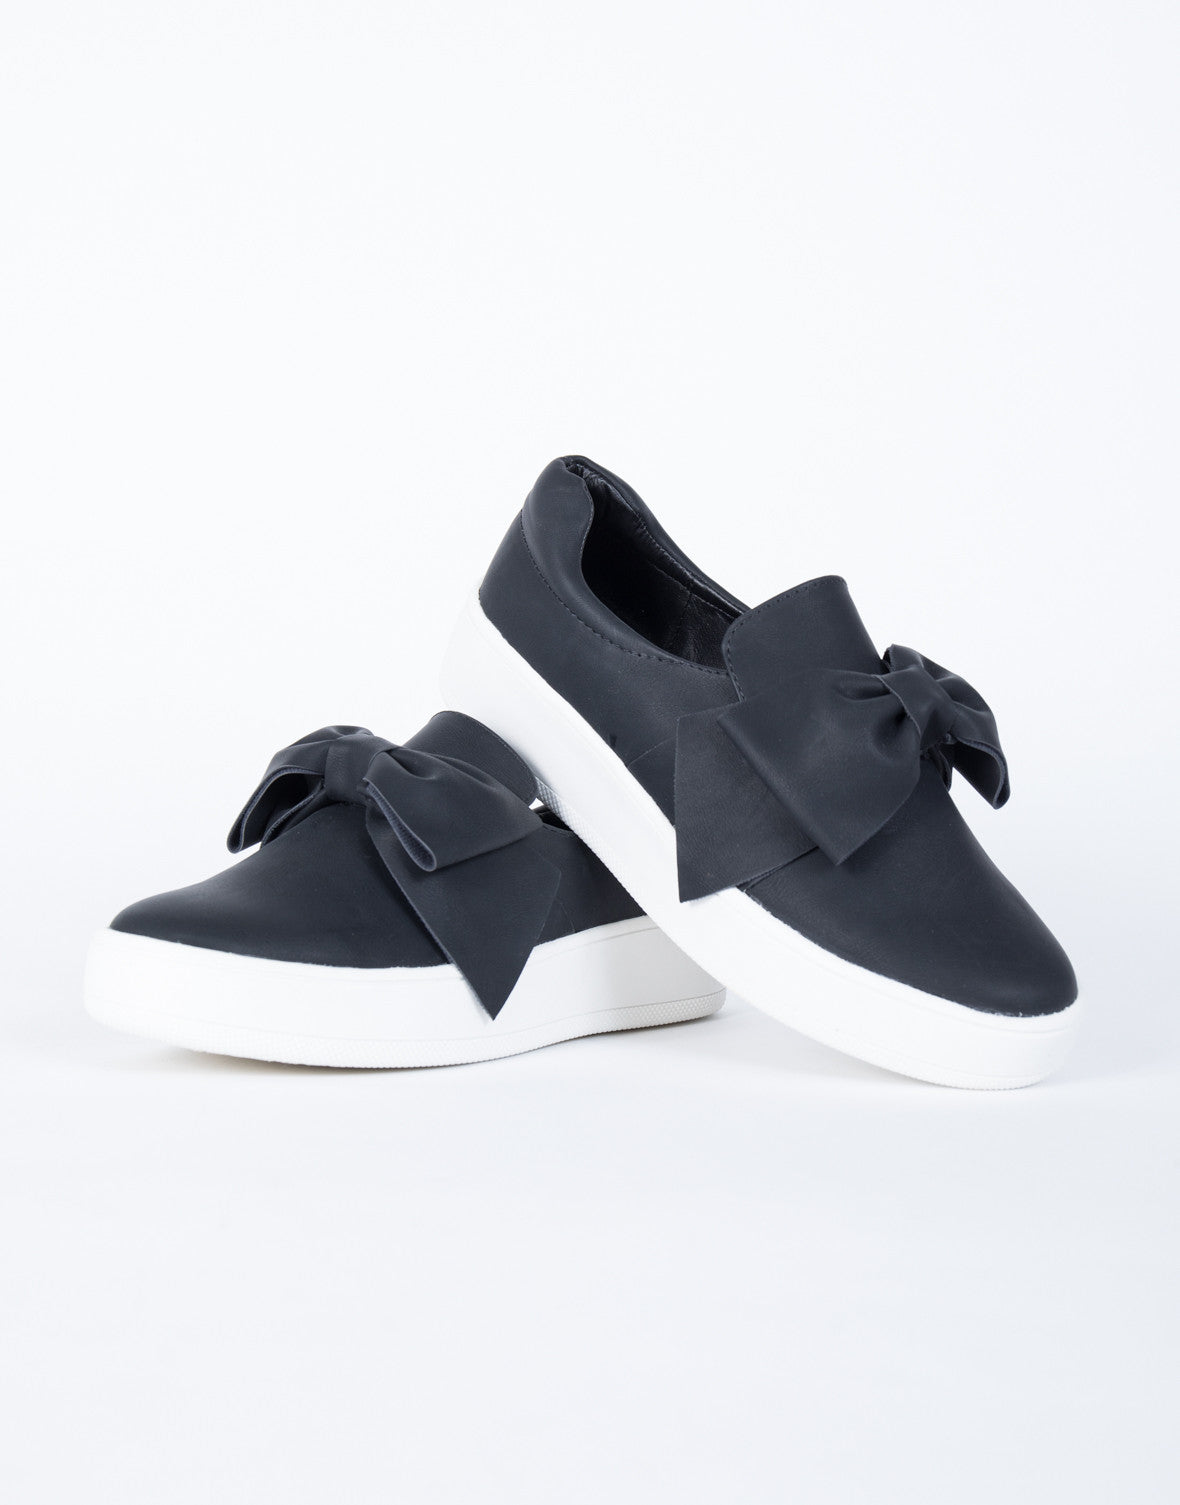 black bow sneakers